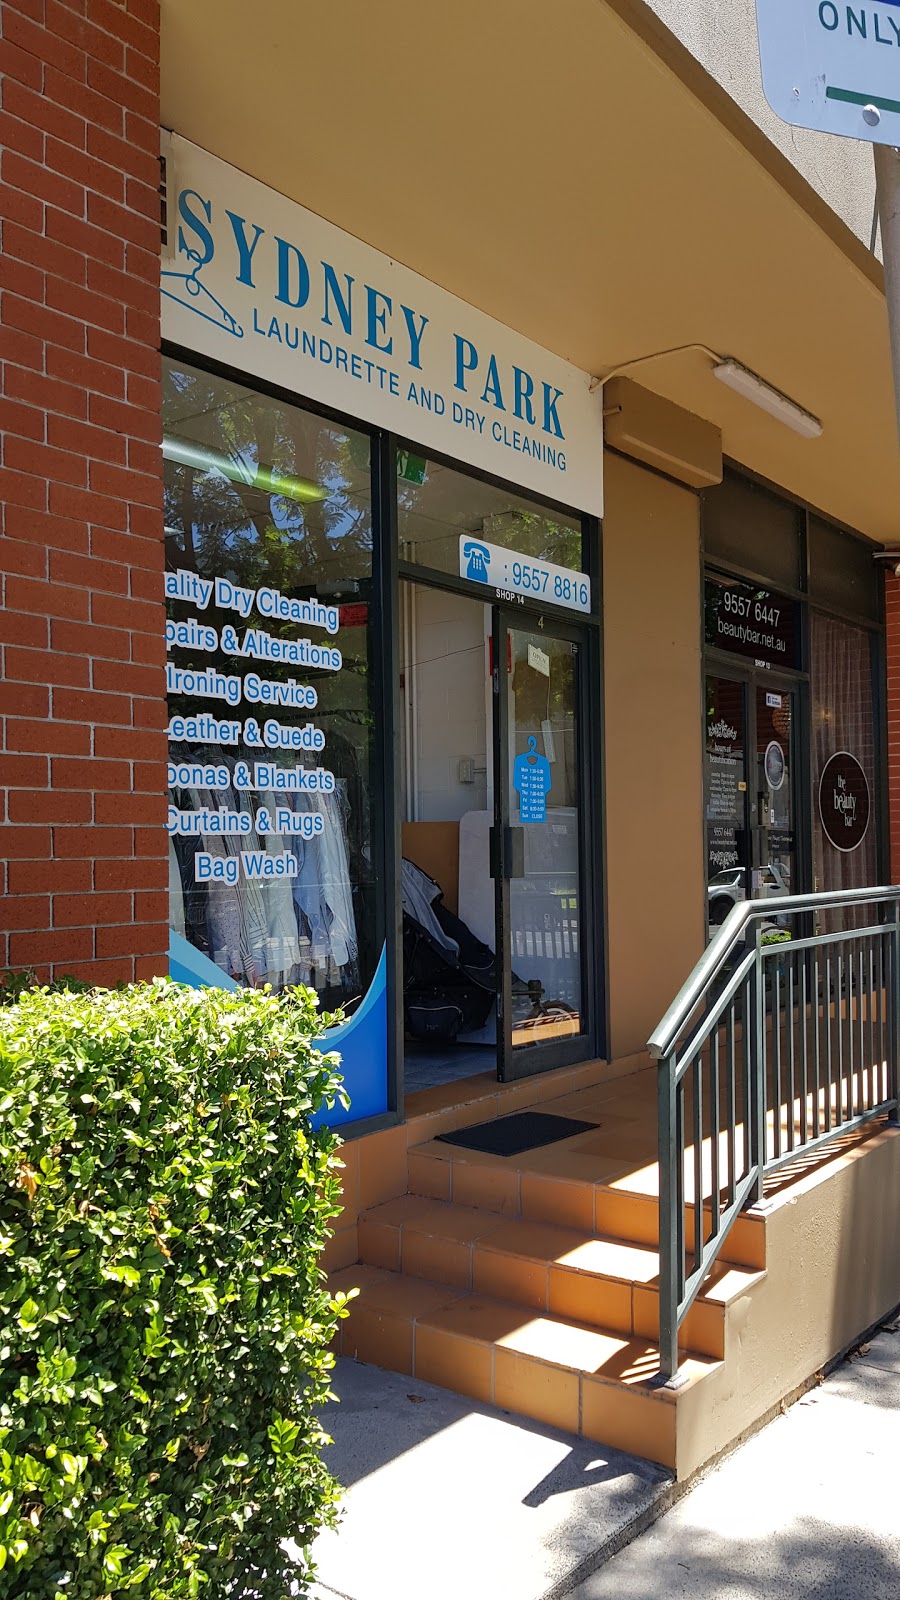 Sydney Park Laundry and Drycleaners | laundry | 177 Mitchell Rd, Erskineville NSW 2043, Australia | 0295578816 OR +61 2 9557 8816